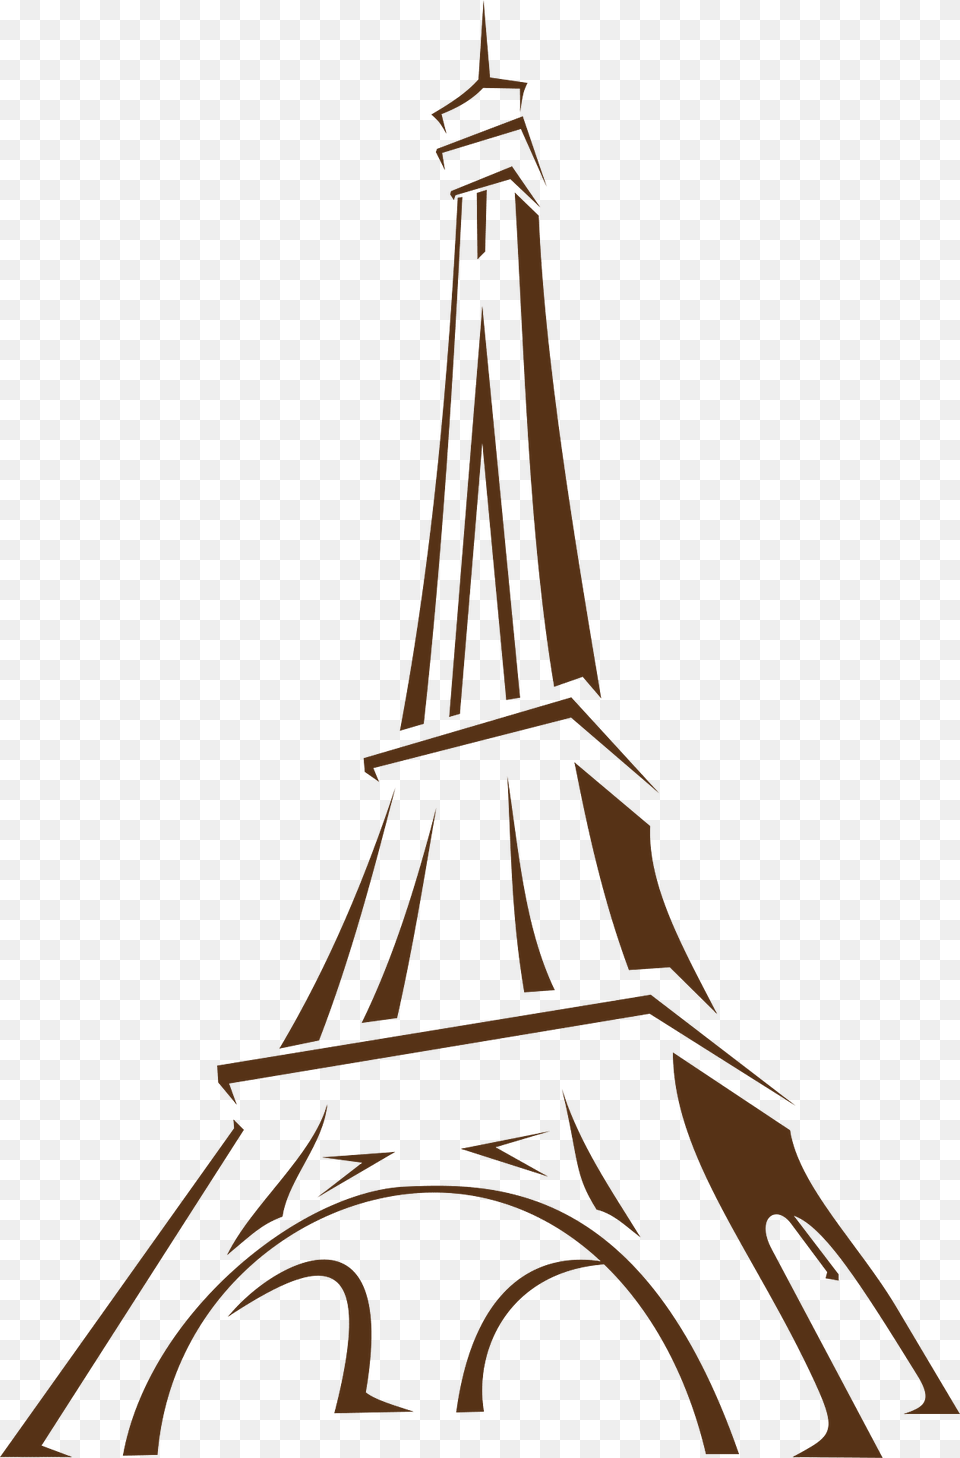 Eiffel Tower Icon Openclipart Clipart, Architecture, Building, Spire, Bell Tower Png Image